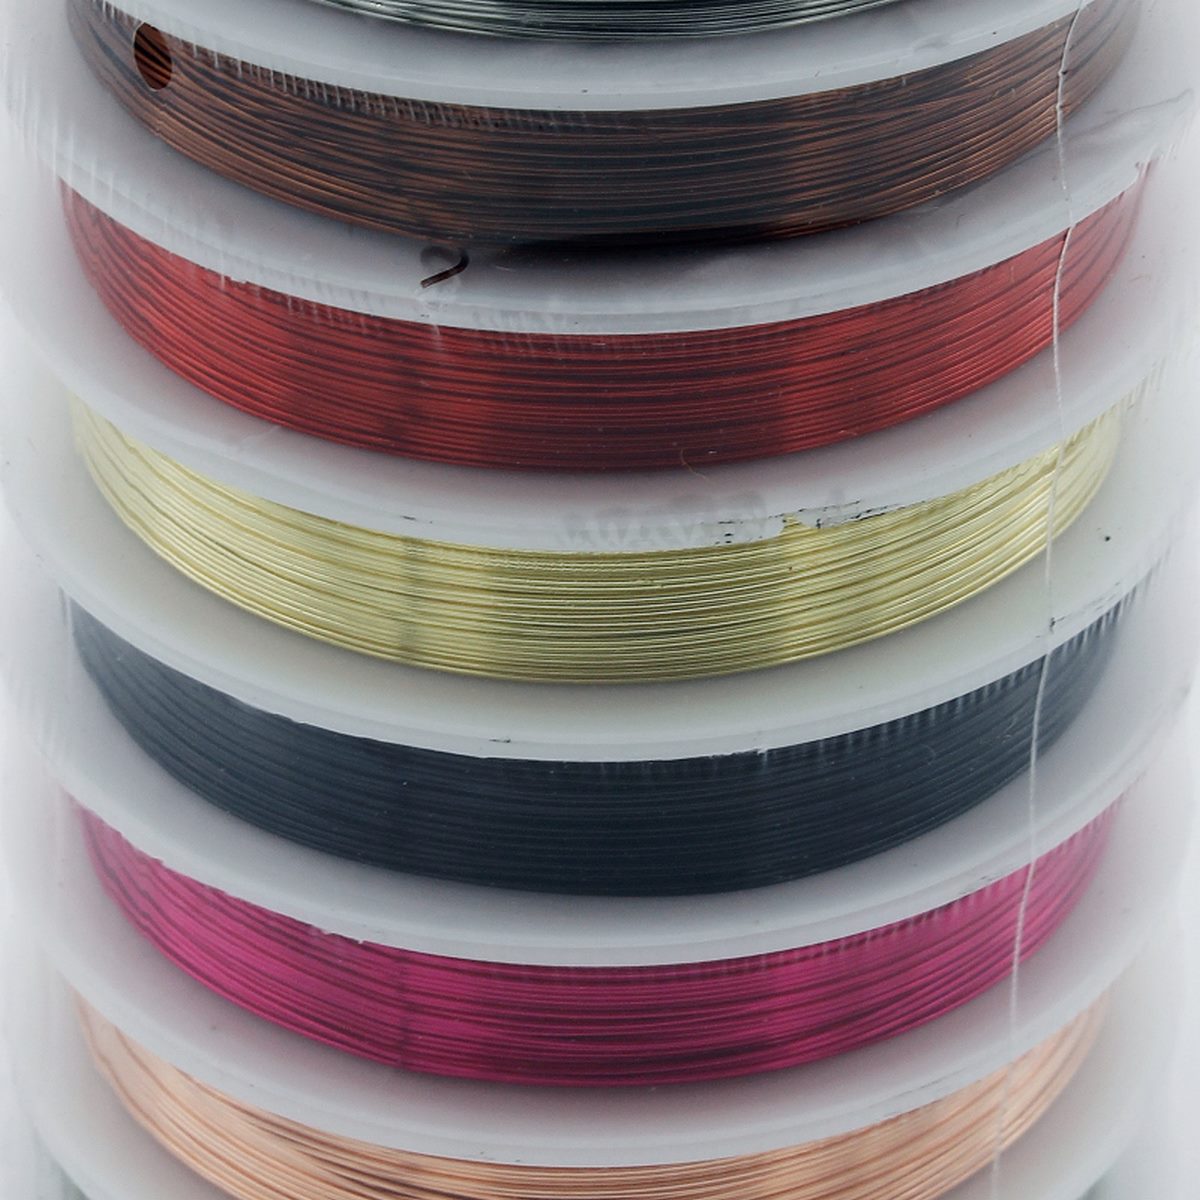 jags-mumbai Beads Beading Wire No.3 18M Single Colour I Contain 1 Unit Roll of assorted Color